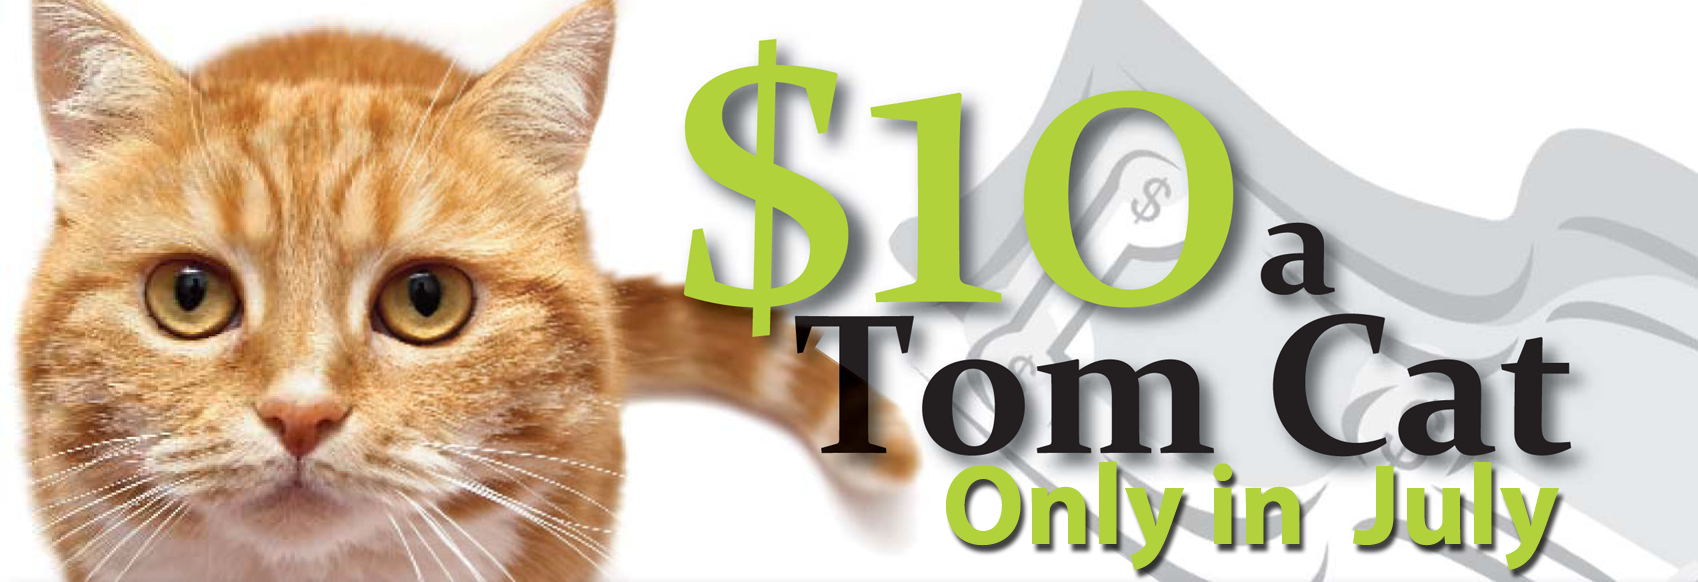 10 a Tom cat neuter certificates available in July Spay/Neuter Your